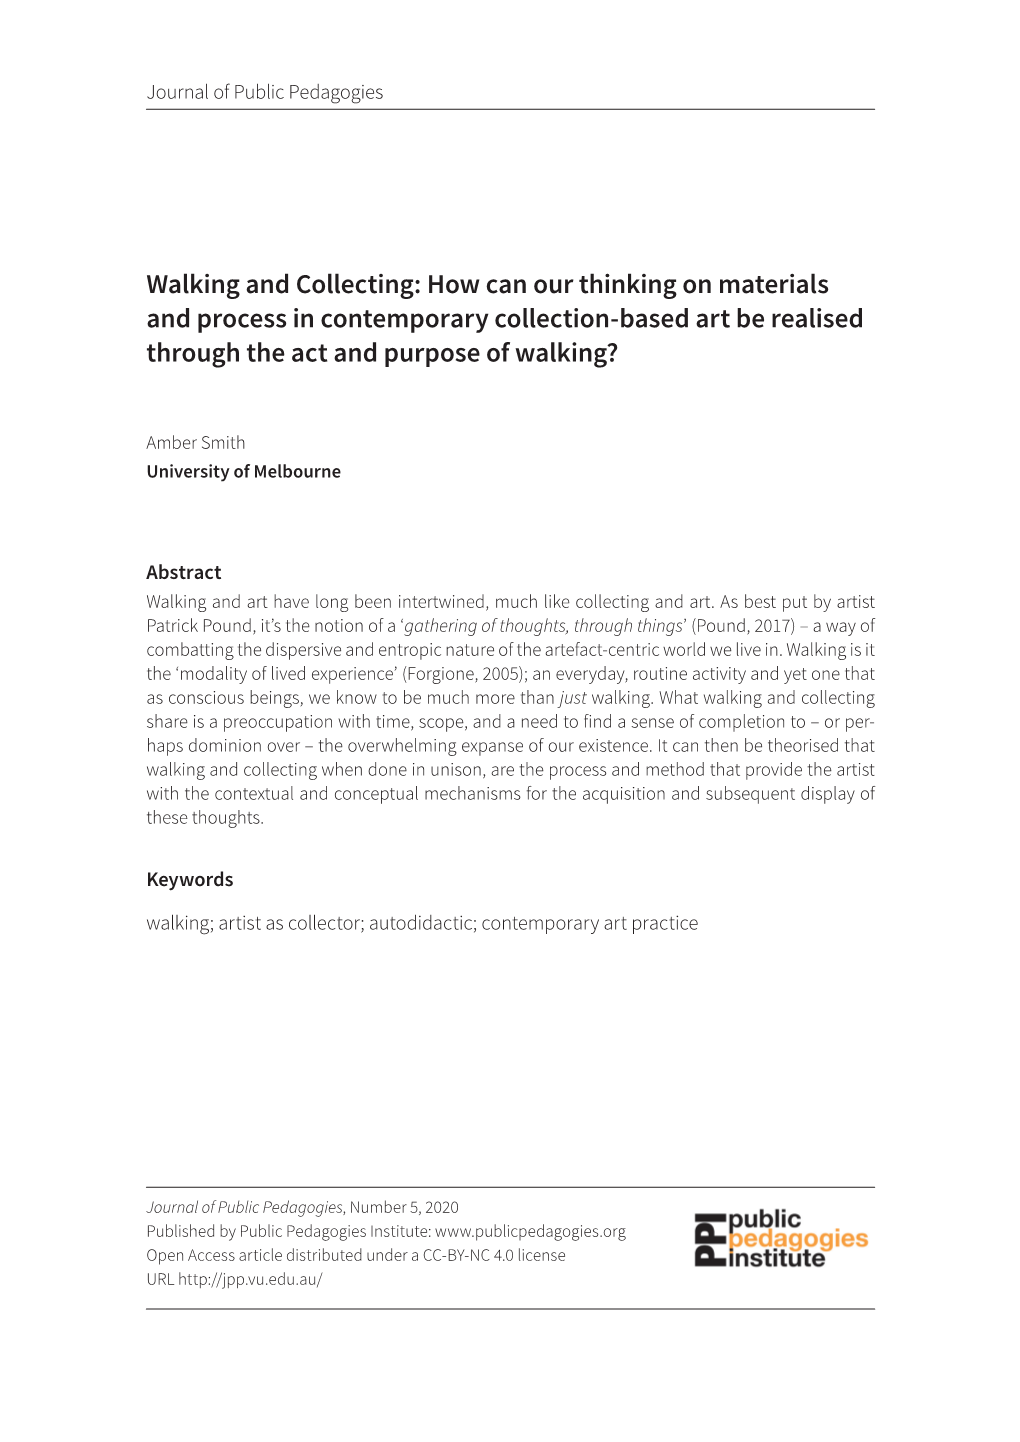 Walking and Collecting: How Can Our Thinking on Materials and Process in Contemporary Collection-Based Art Be Realised Through the Act and Purpose of Walking?